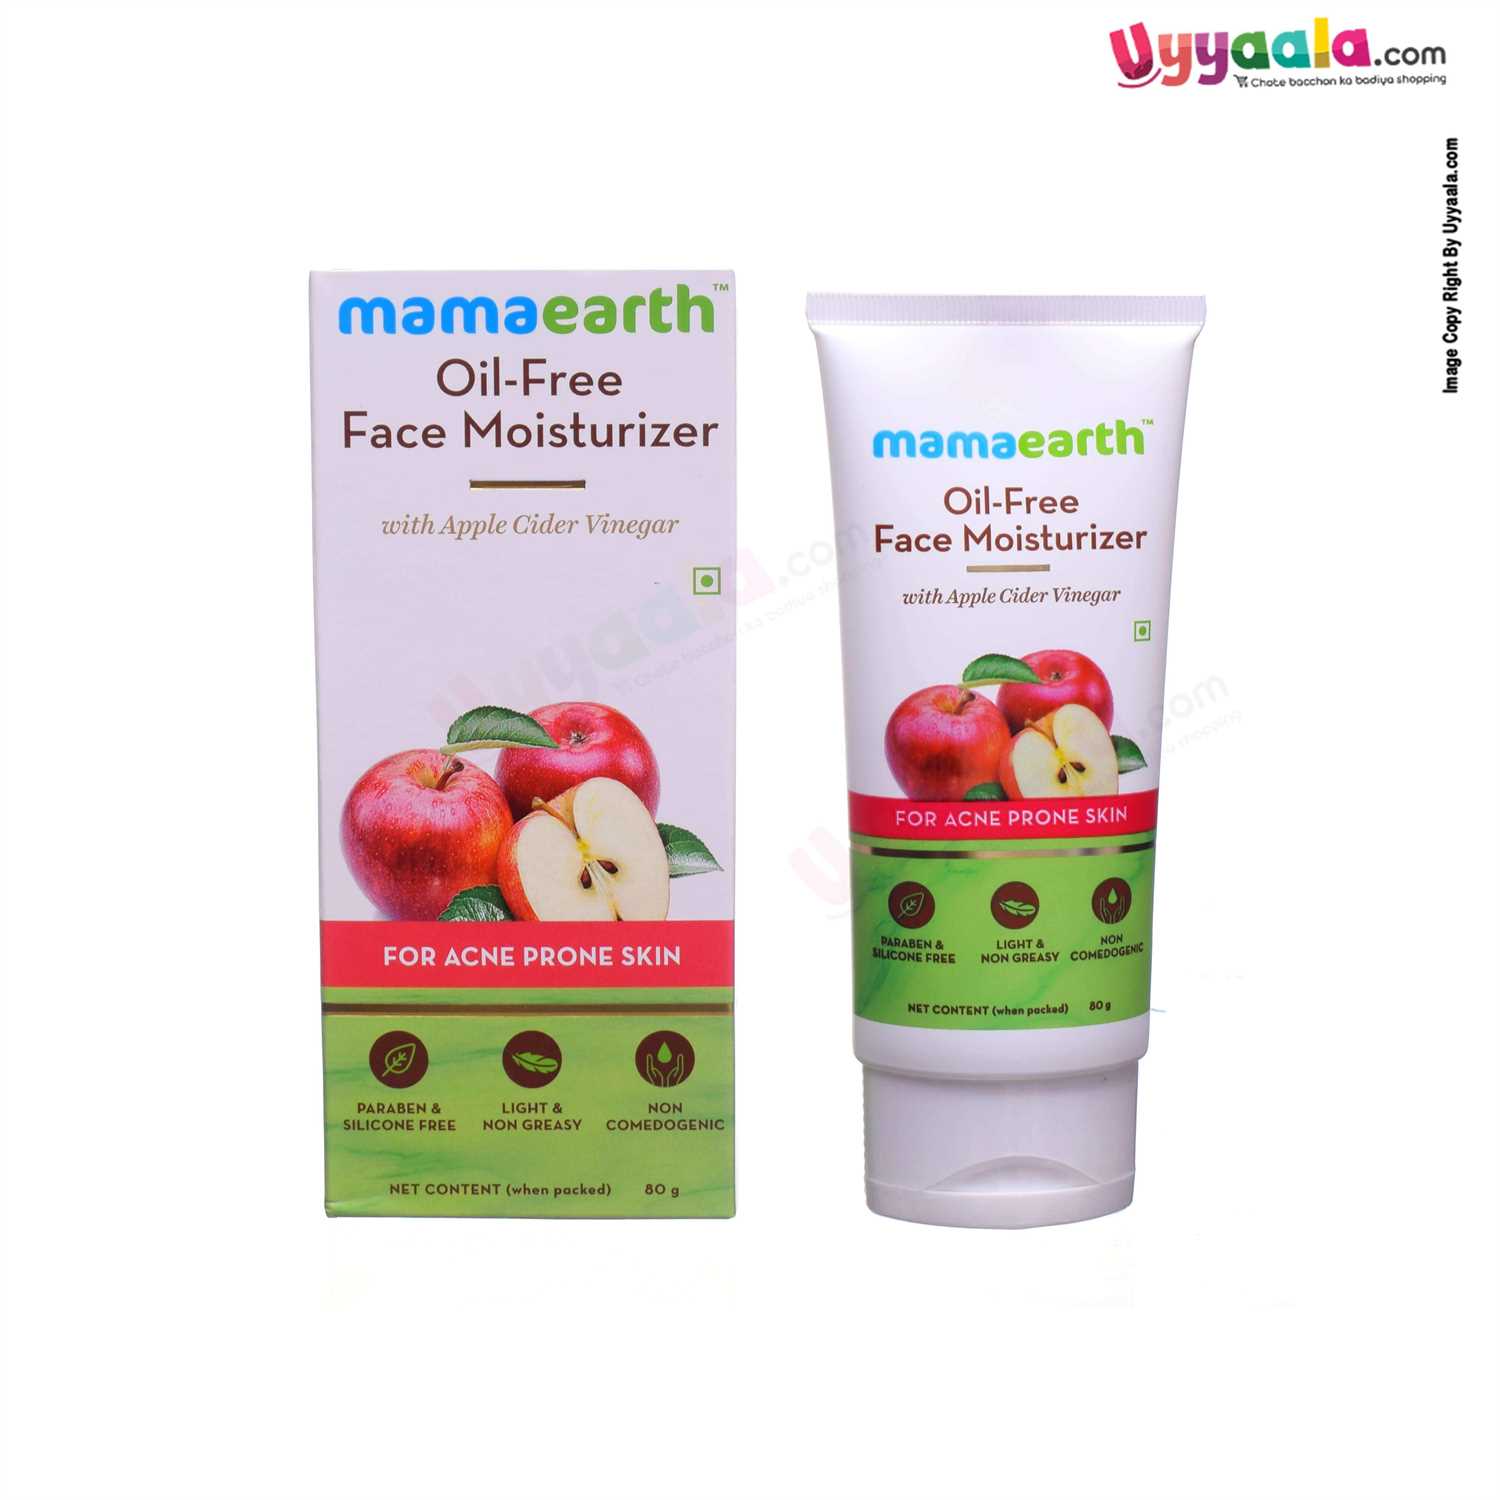 MAMAEARTH Oil Free Face Moisturizer with Apple Cider Vinegar for Adult - 80g